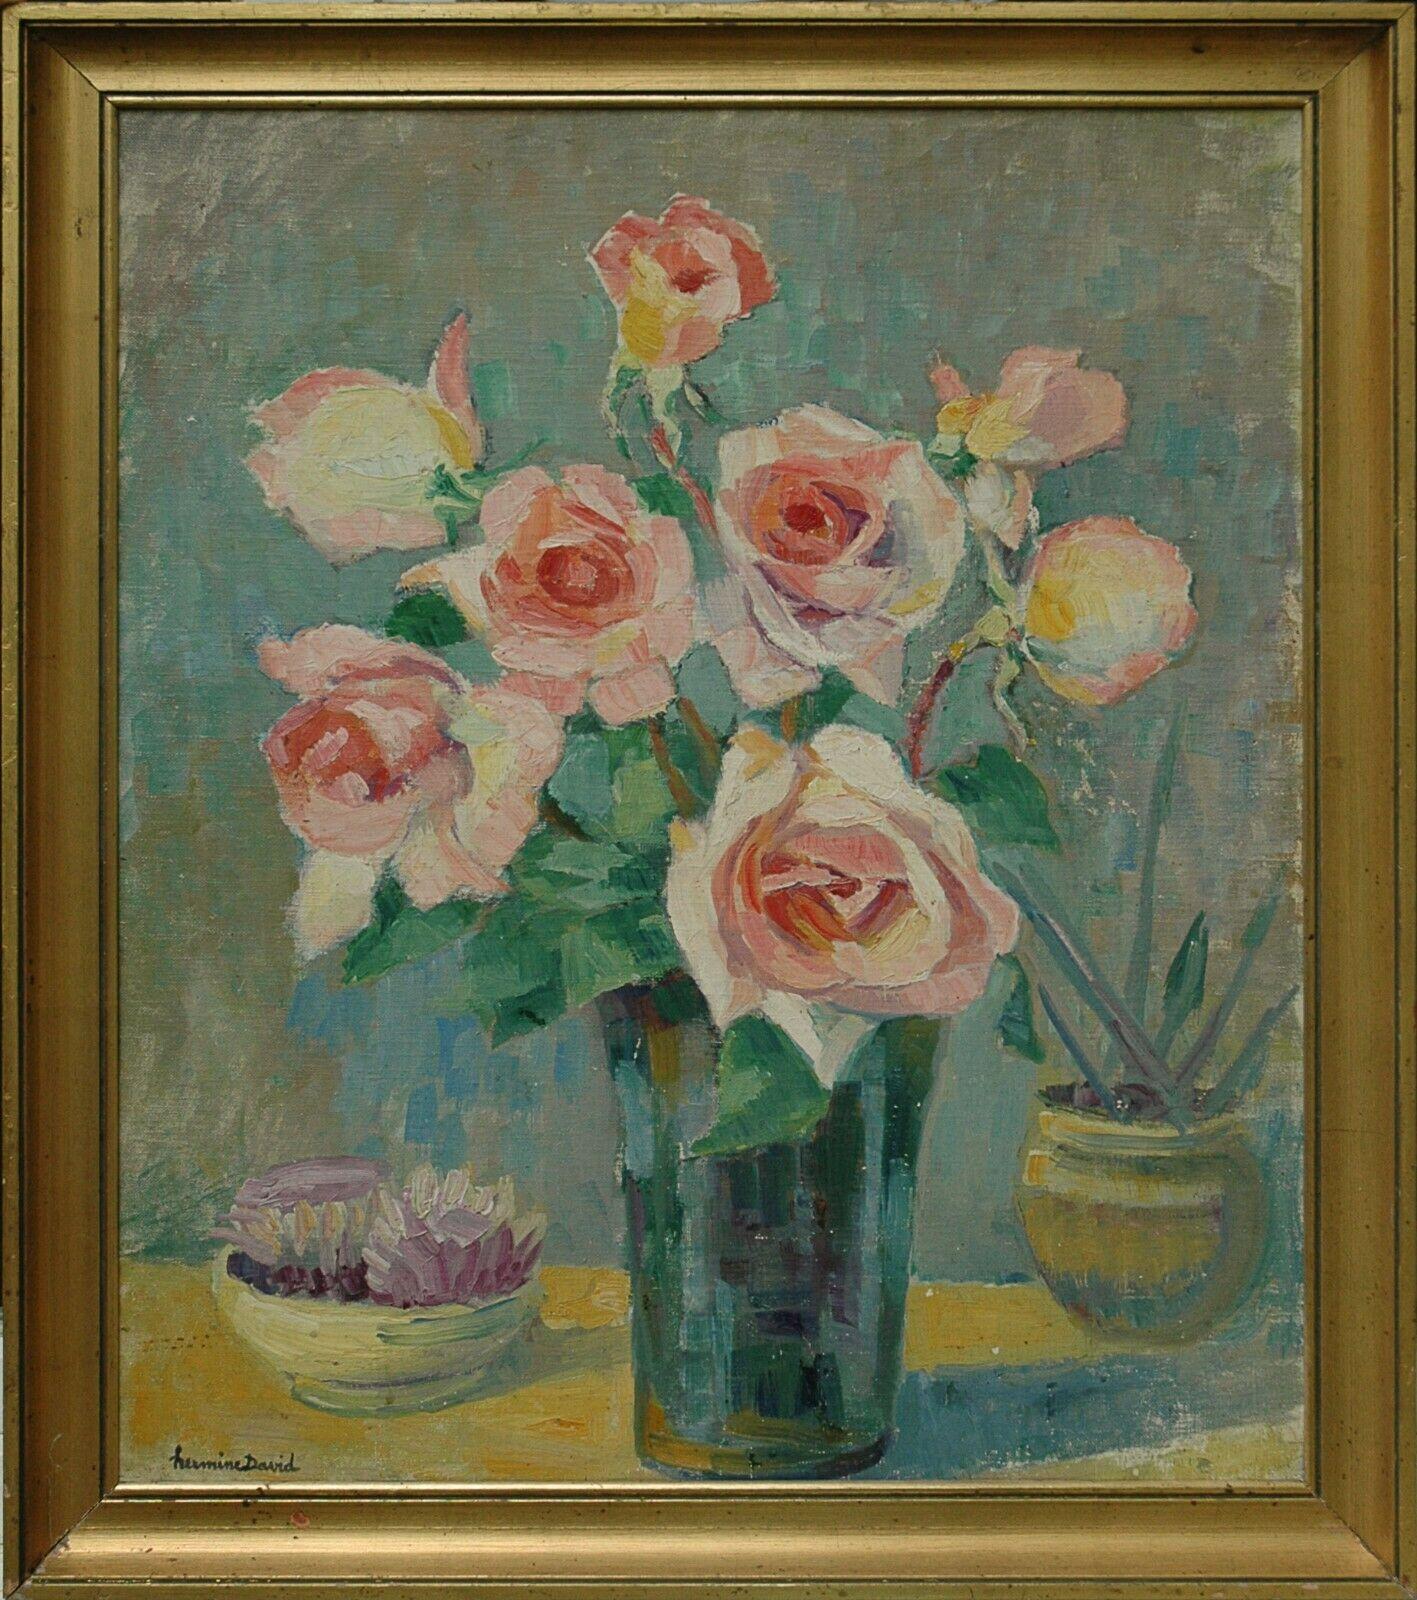 Bouquet of Roses by Hermine David, oil on cardboard linen, signed. Framed.

Hermine Lionette Cartan David (19 April 1886 in Paris – 1 December 1970 in Bry-sur-Marne) was a French painter and the wife of Jules Pascin, also a painter.

She became